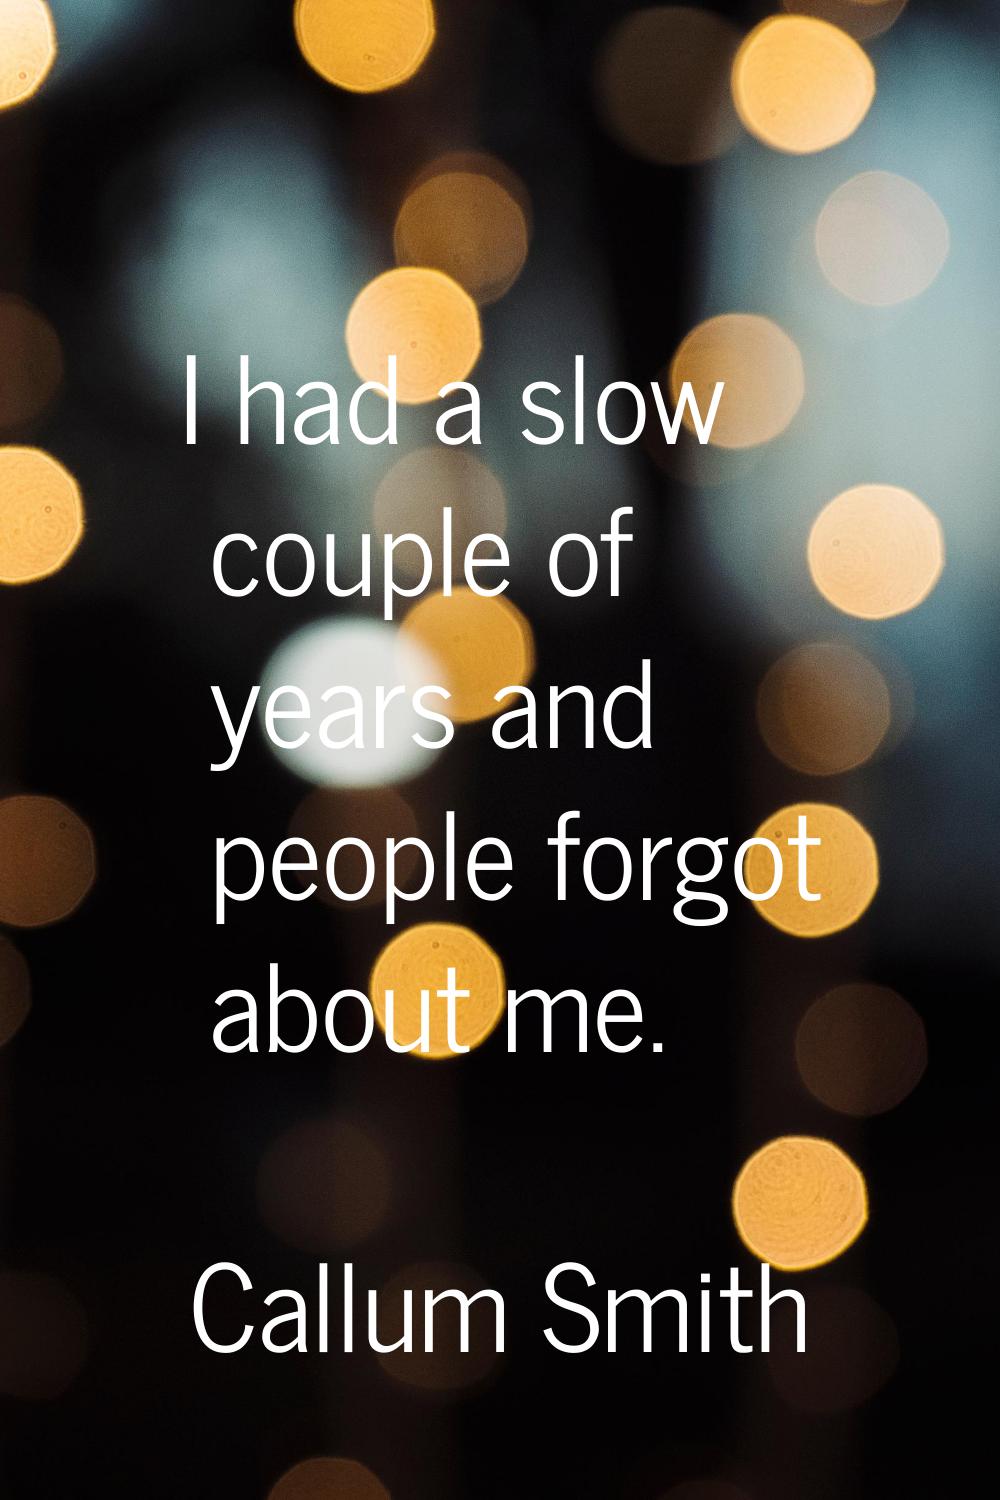 I had a slow couple of years and people forgot about me.